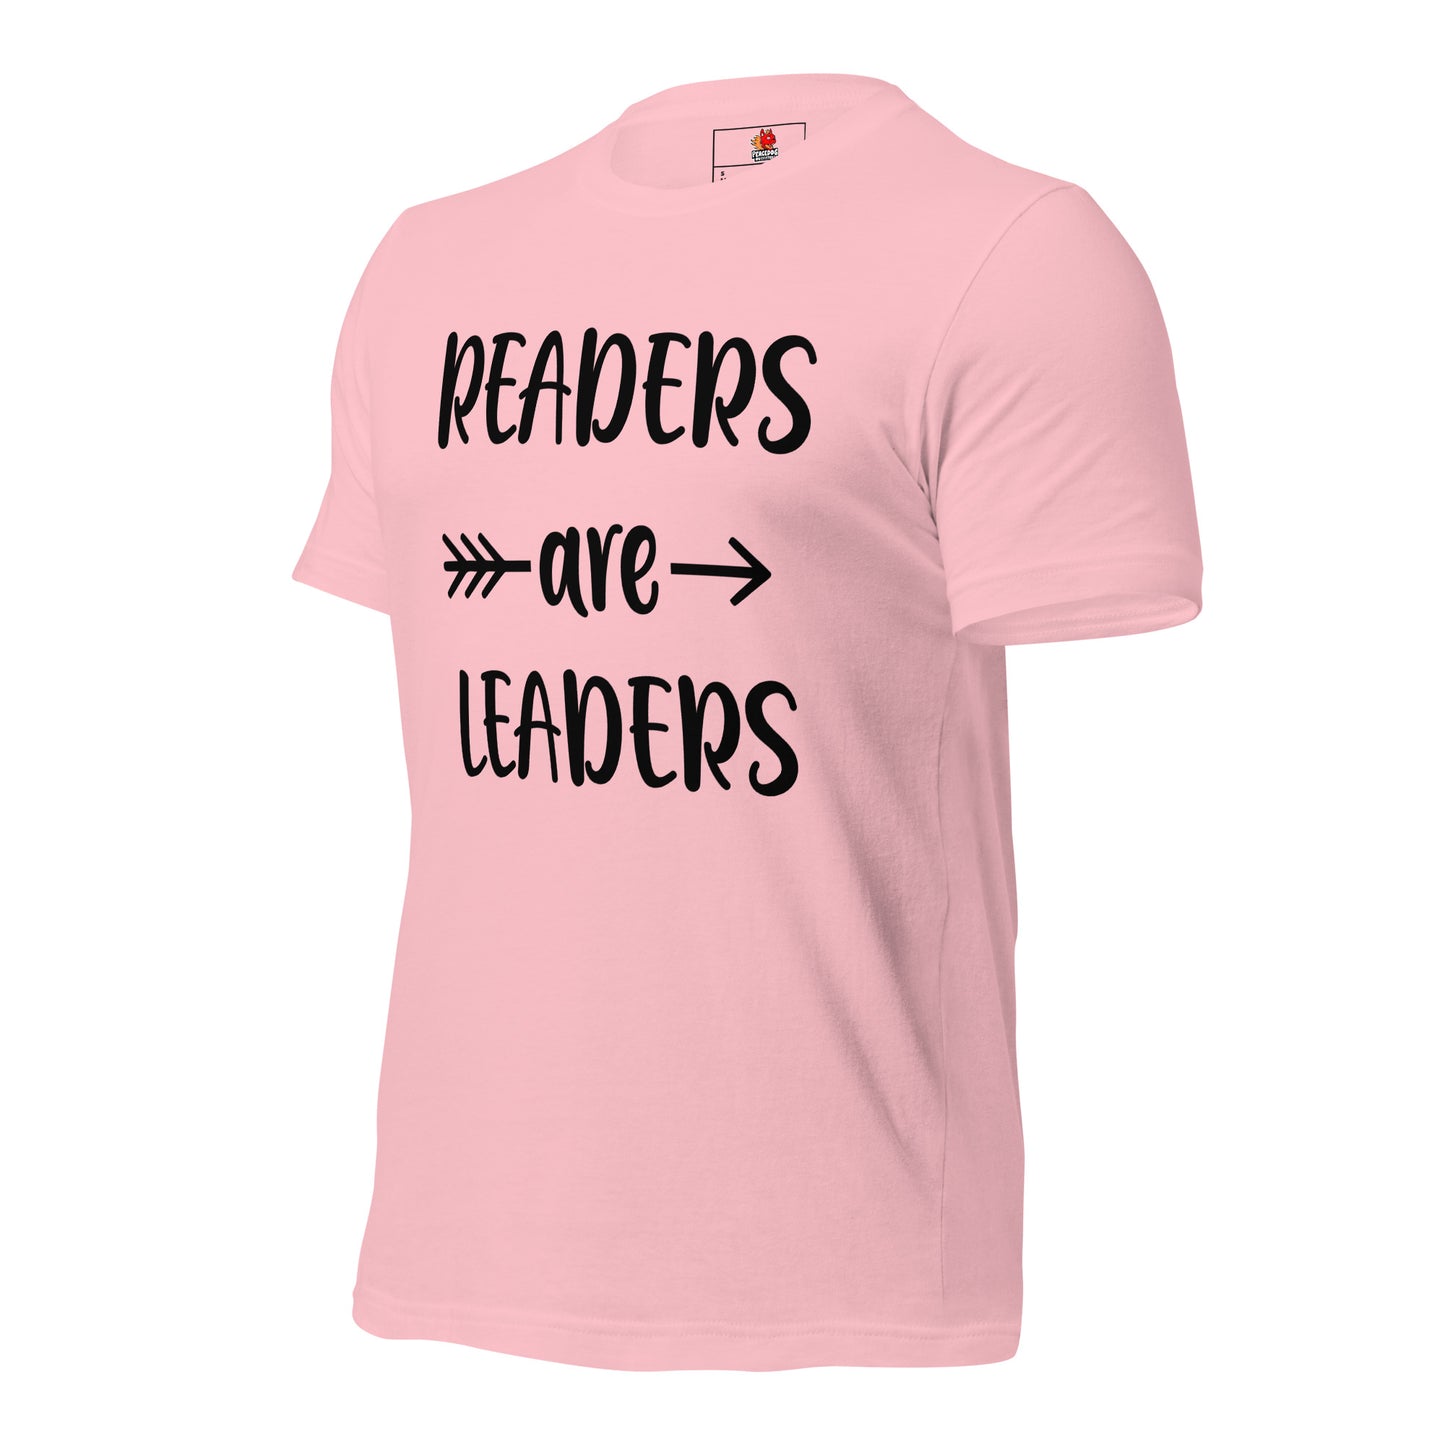 Readers are Leaders T-shirt